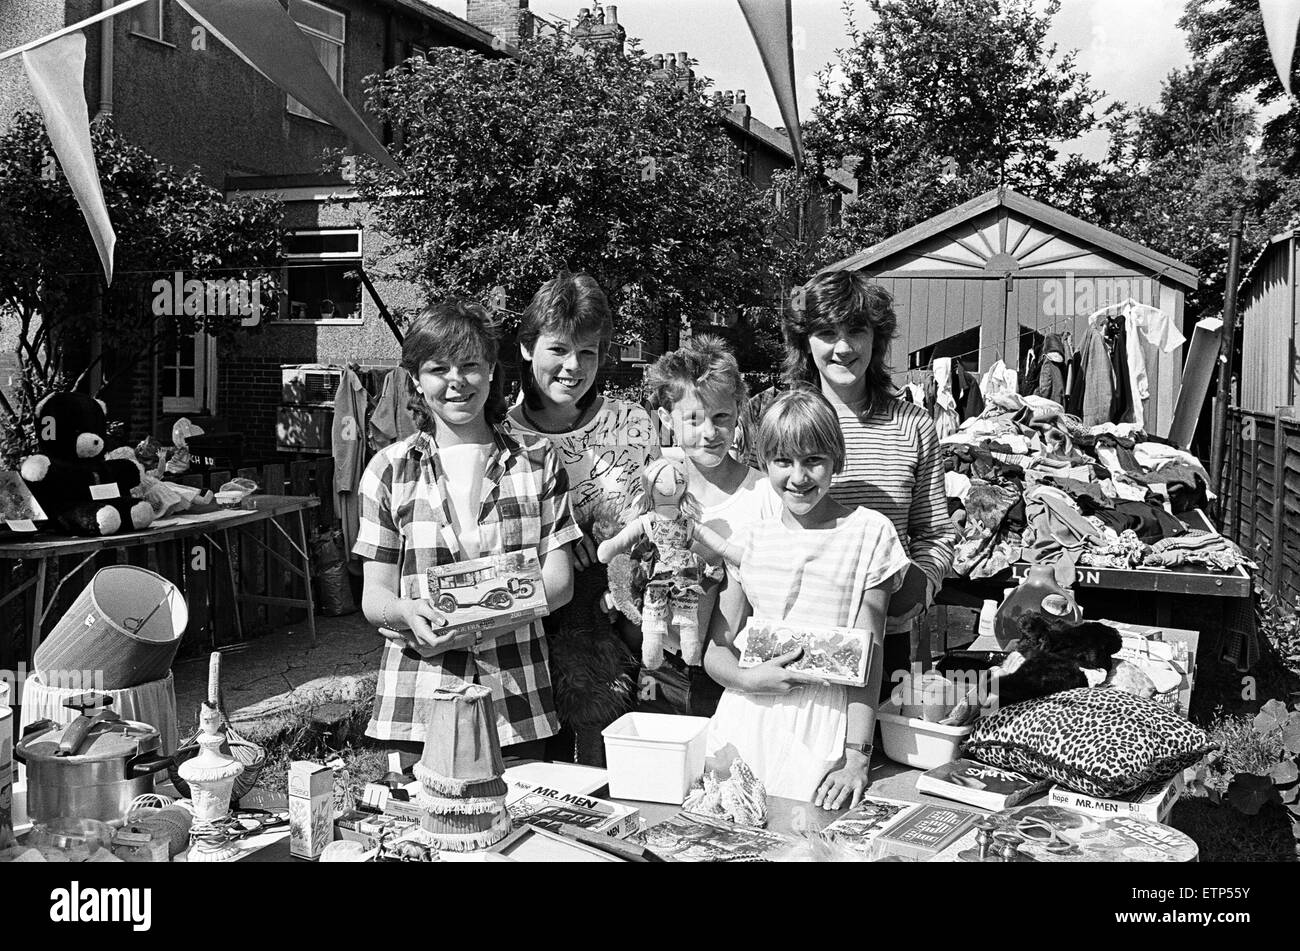 Showing some of the goods at a charity jumble sale on Saturday are (from left) Elizabeth Waite, Janine Brown, Catherine McAleese and Lisa and Tracey Moore.  The event, which also includes games and refreshments, was held in Larch Road, Paddock, at the home of Catherine and her sister, Helen.  The two youngsters and their friends hold the event annually.  This year, it was for the People's Dispensary for Sick Animals and proceeds amounted to £51.00.  10th August 1985. Stock Photo